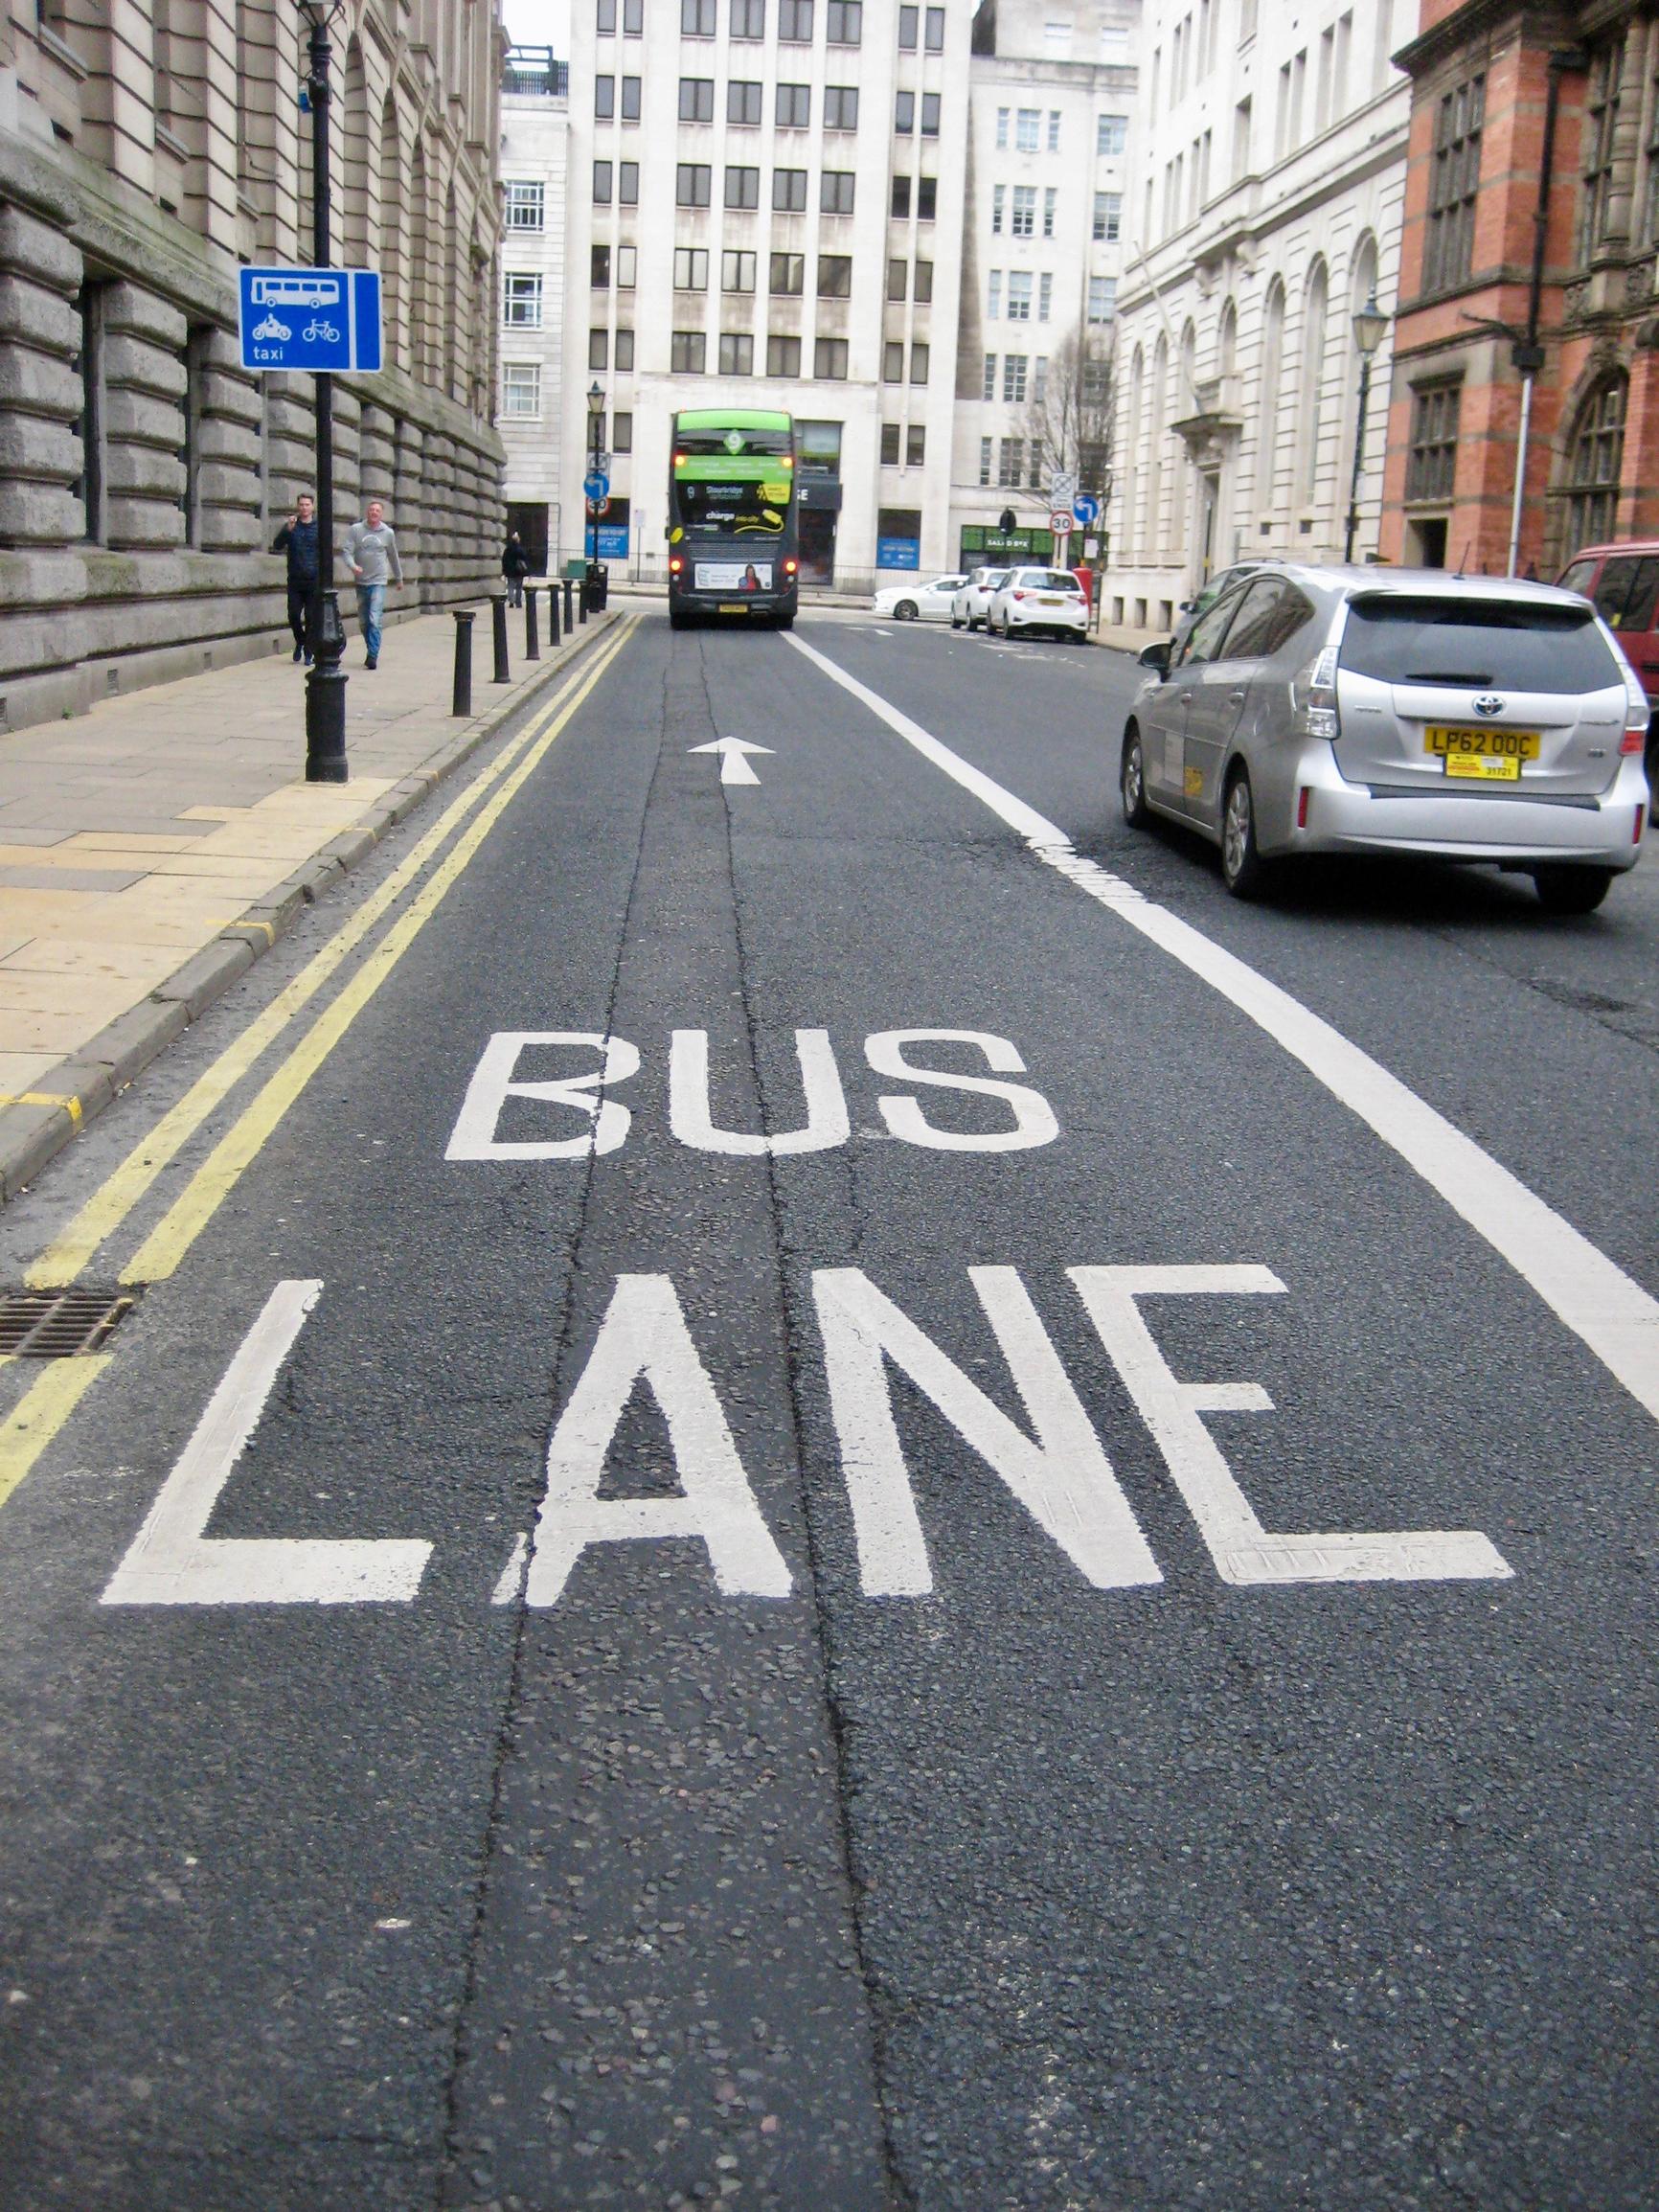 Bus lanes: let’s have more of them, says the DfT